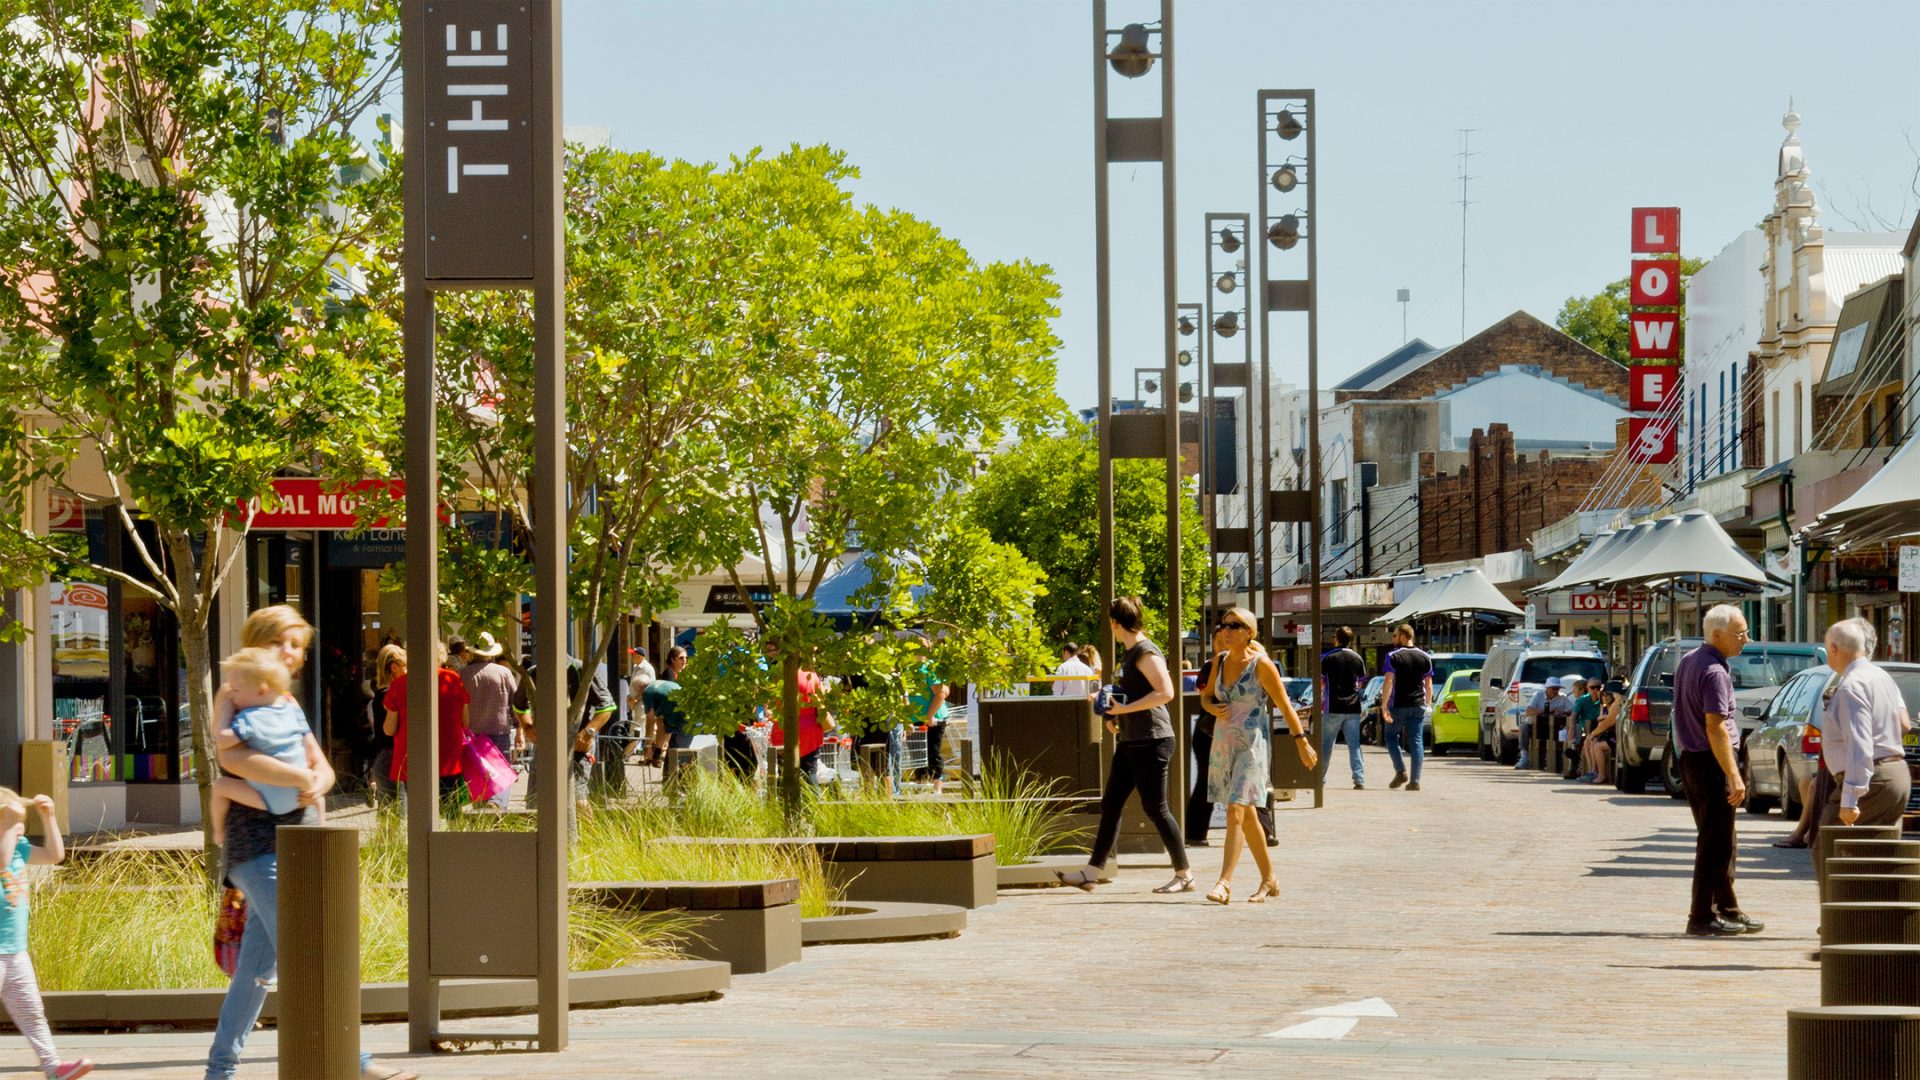 A bustling outdoor shopping street in Maitland with people walking, some holding children. Tall, stylish light posts and greenery line the street alongside various shops and restaurants. The sky is clear, making it a perfect sunny day by the levee.